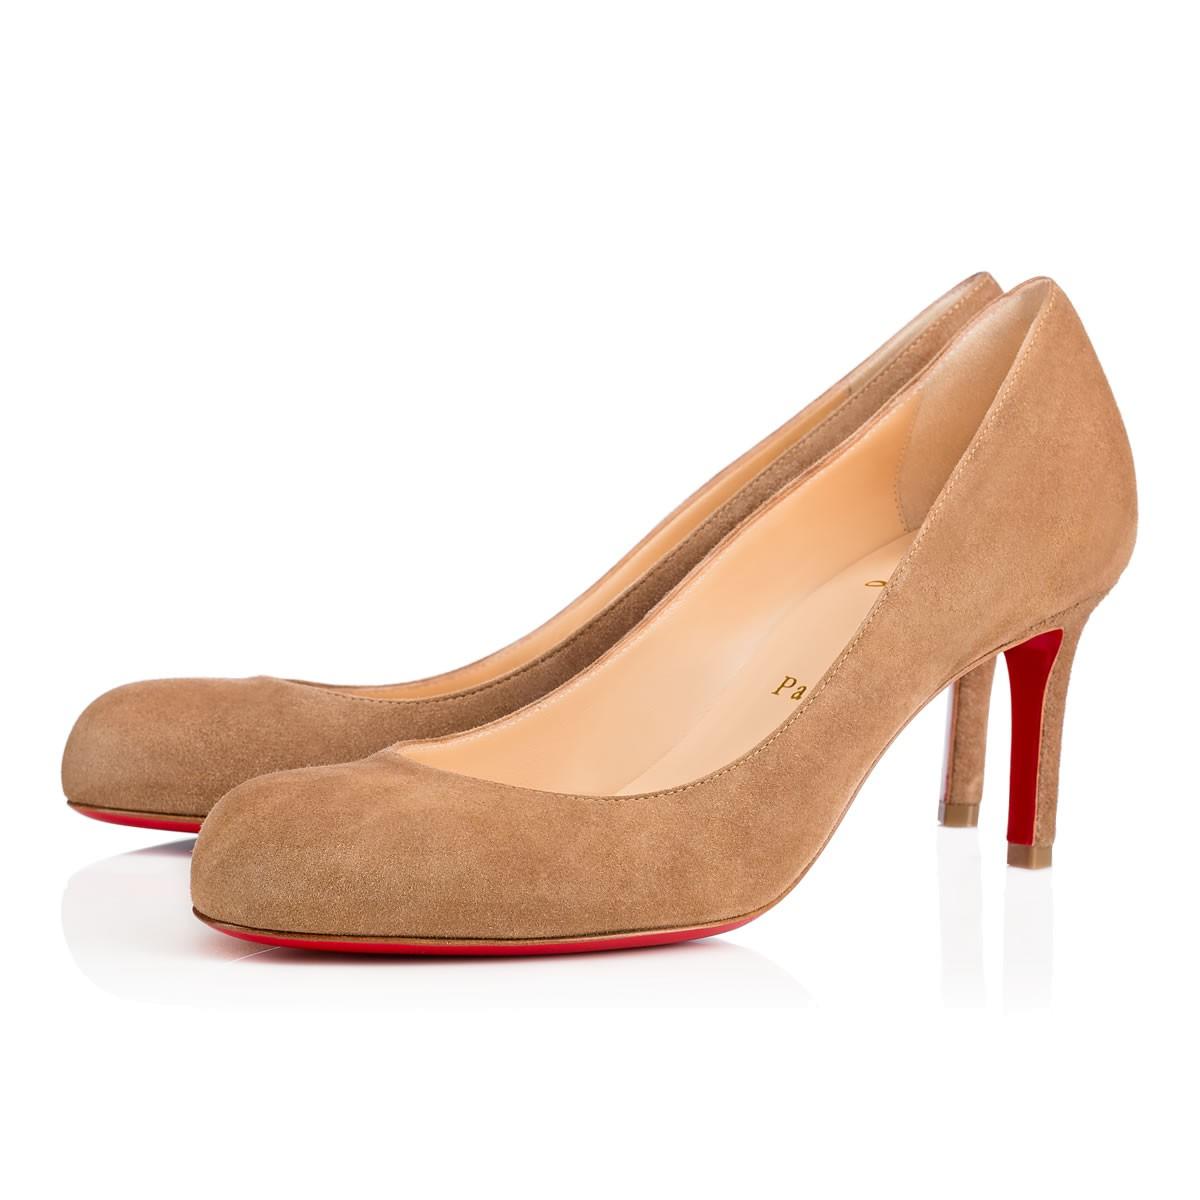 Christian Louboutin Simple Suede 70mm Red Sole Pump, Beige In ...